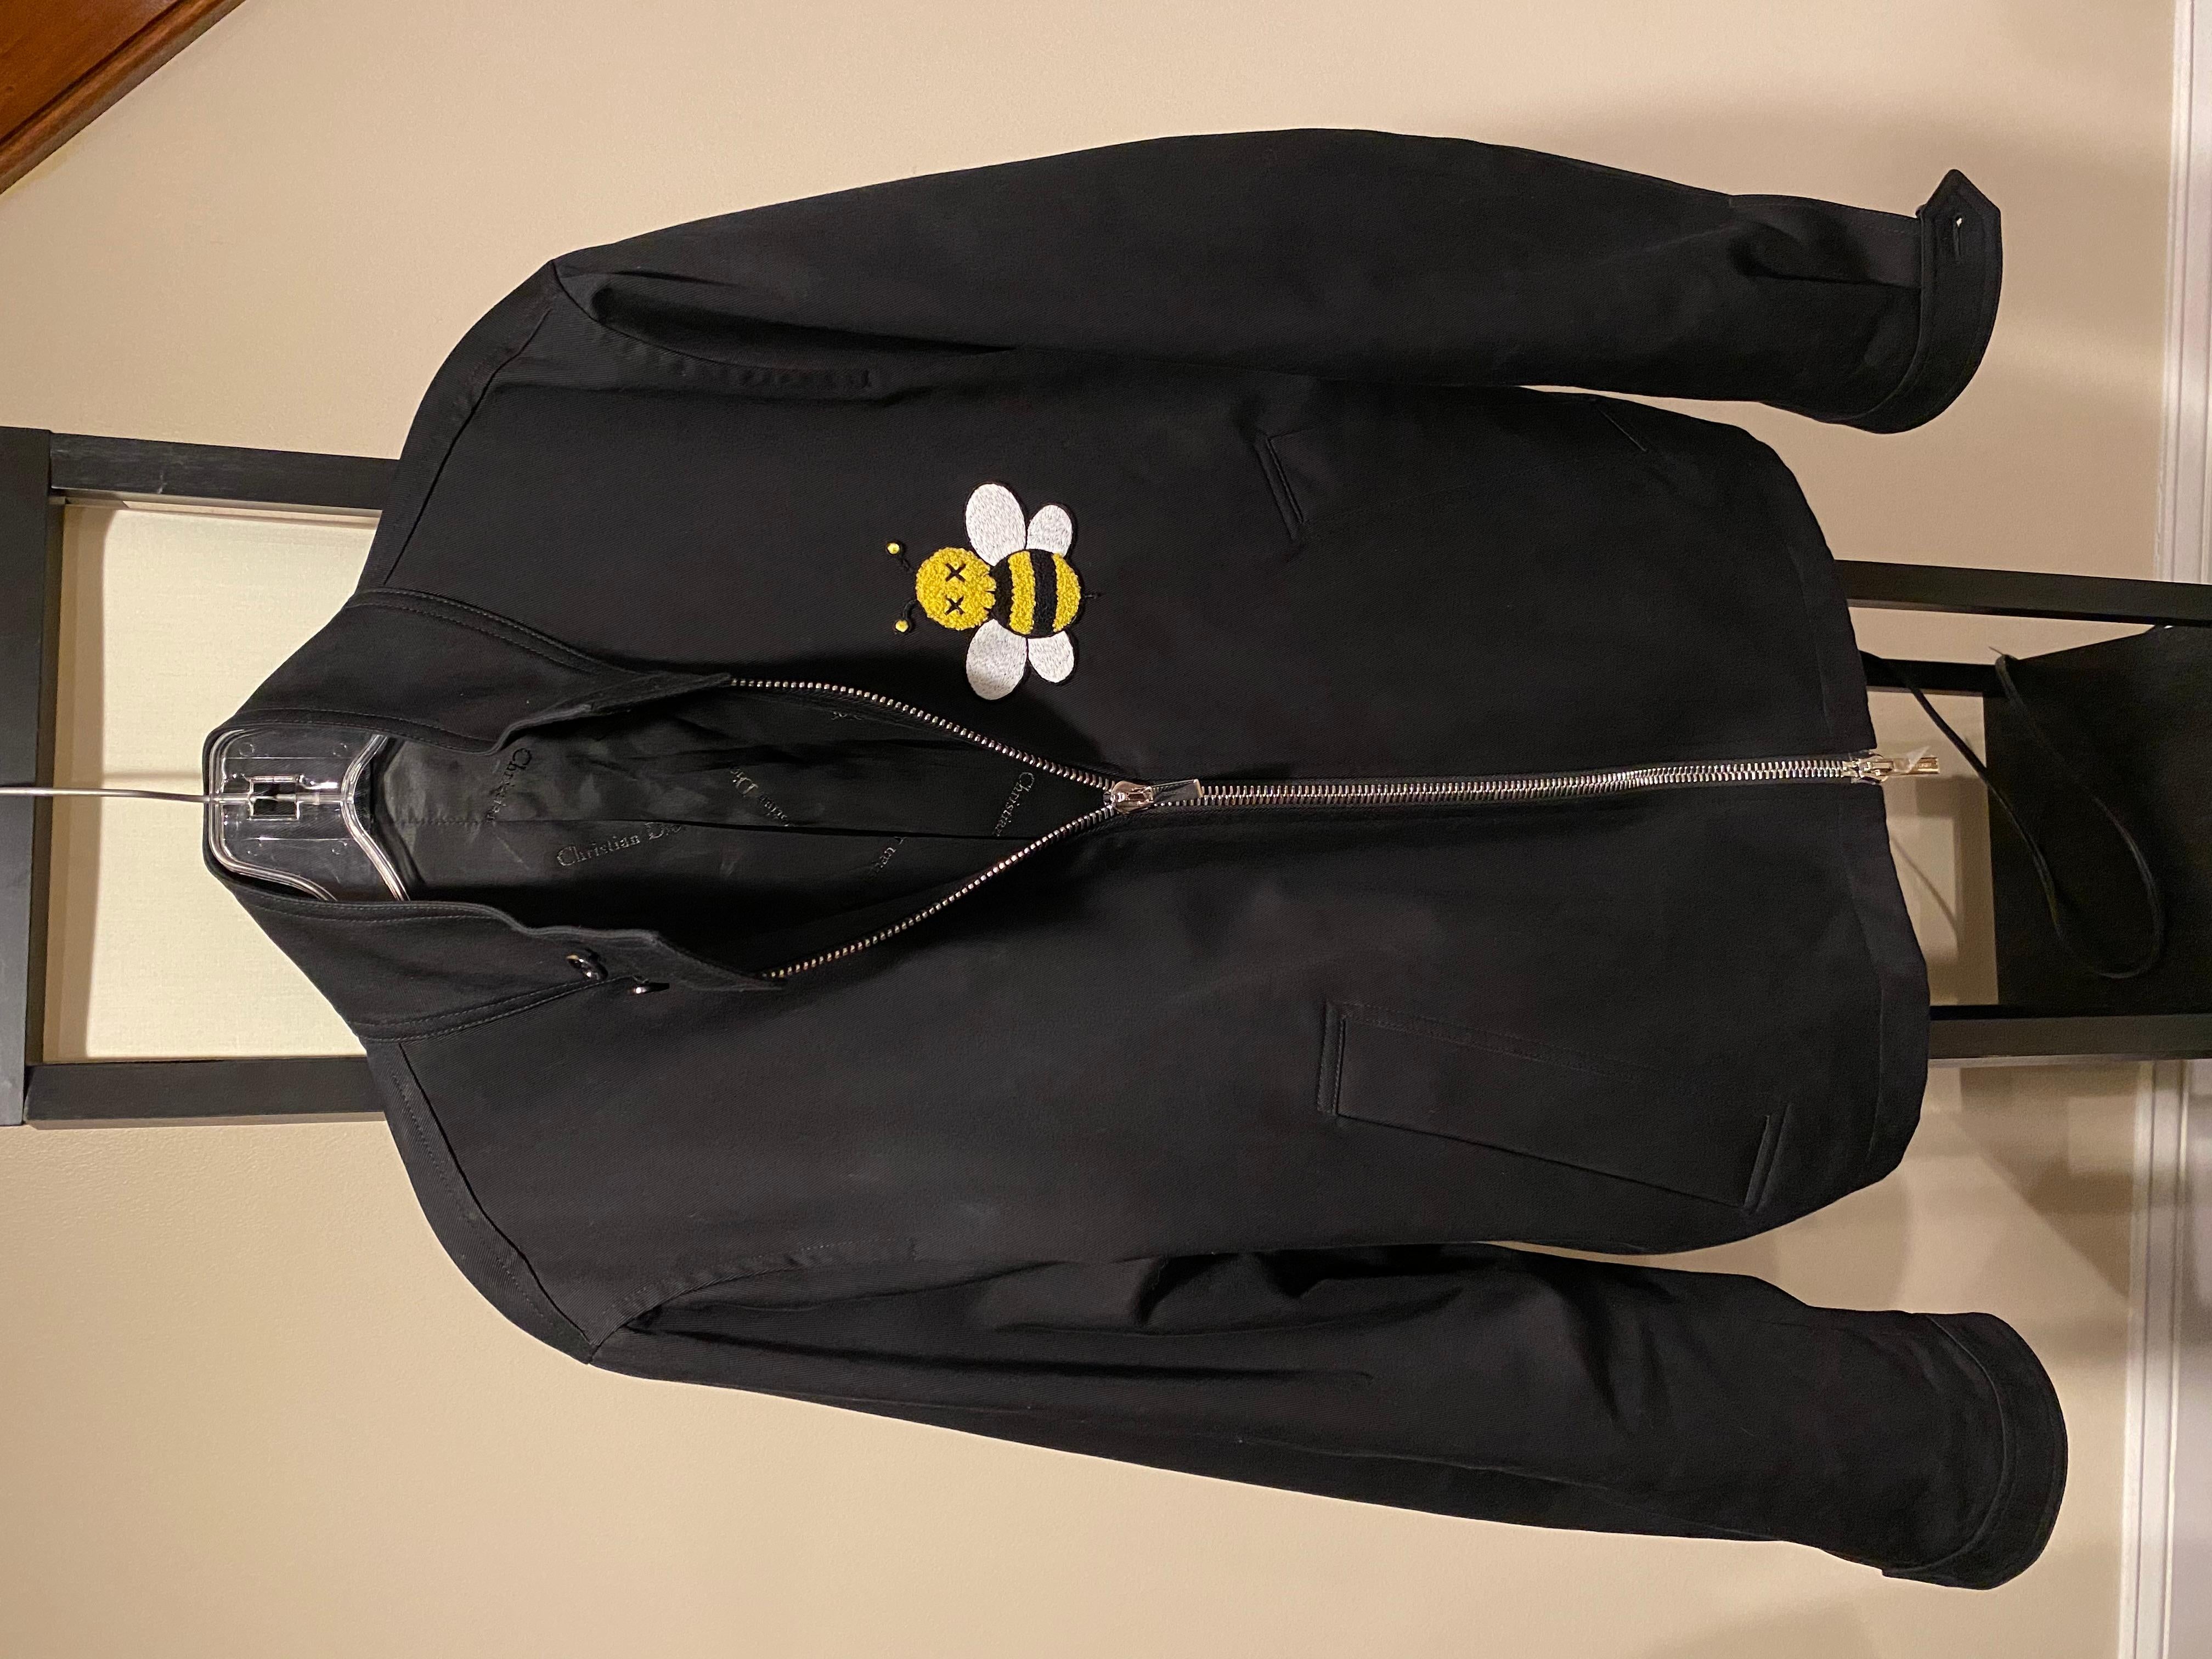 Kaws x Dior Bee Drill Jacket
Size 50 (fits a US large)
Great condition (view pictures)
Silk on the inside of jacket.

Extremely rare jacket. No one has this piece on grailed or any other sites besides a 52 on stockx which is 10k!
A true art piece